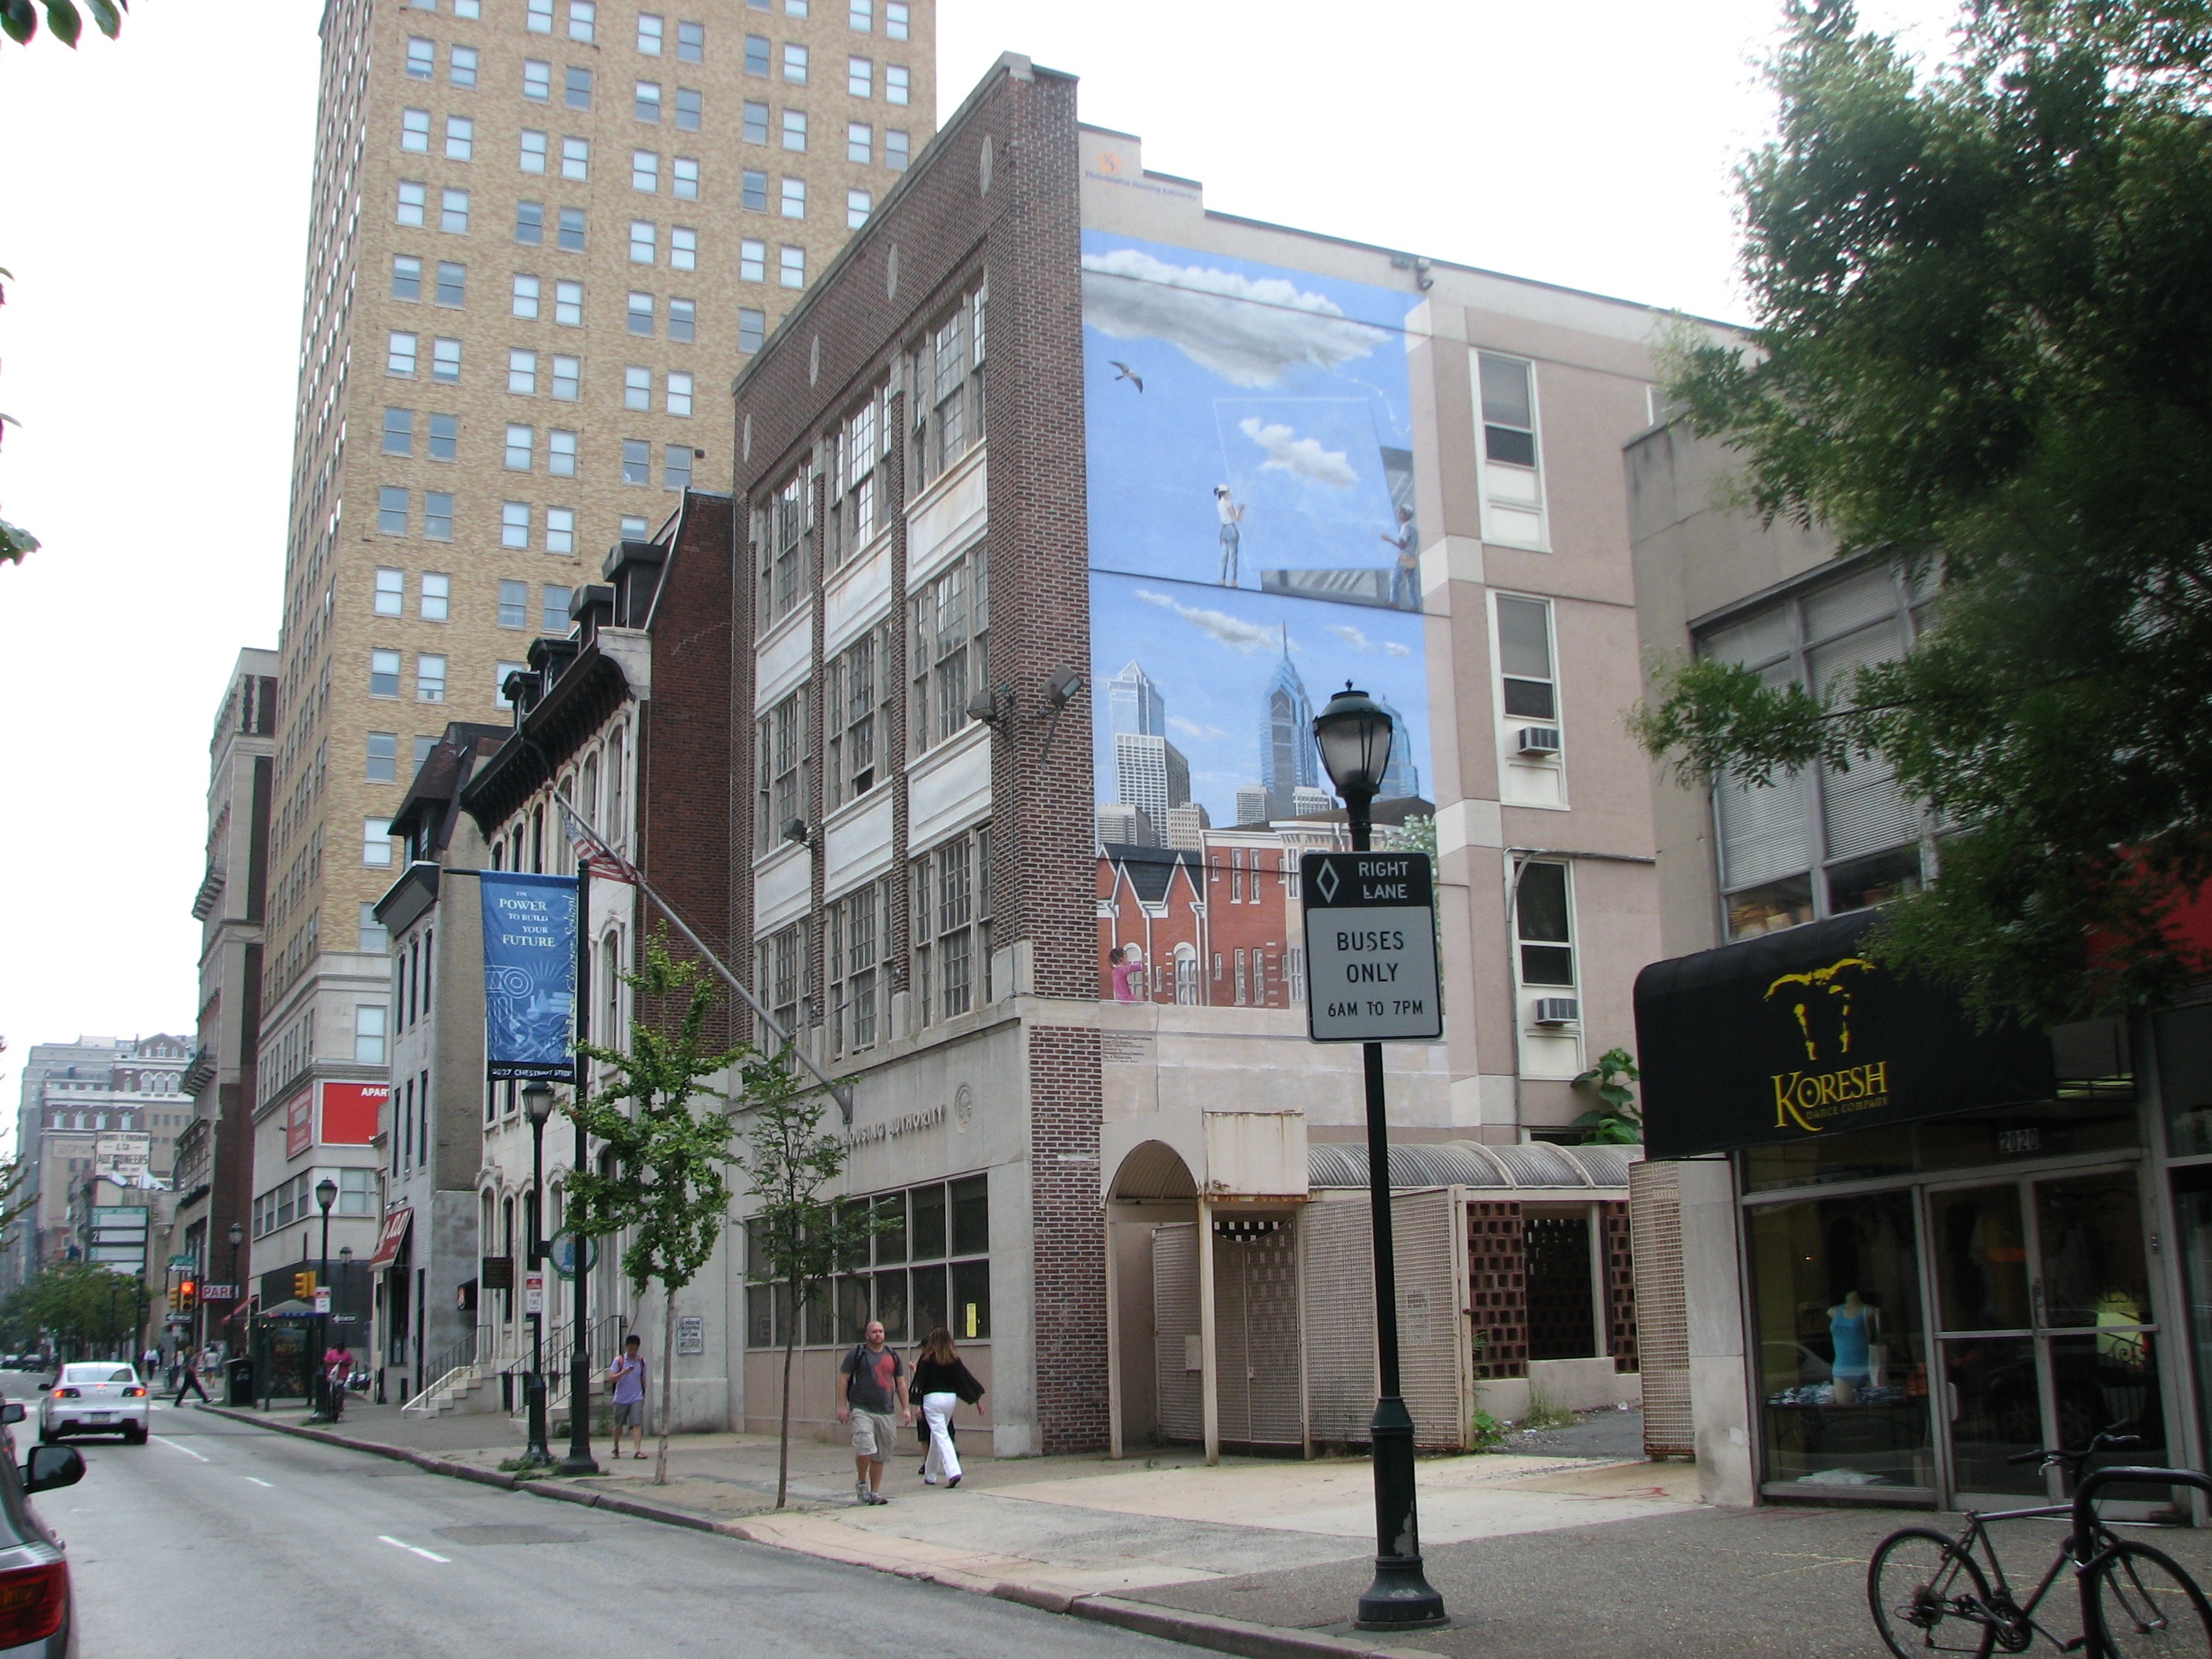 The view of the existing PHA building, looking east on Chestnut Street.